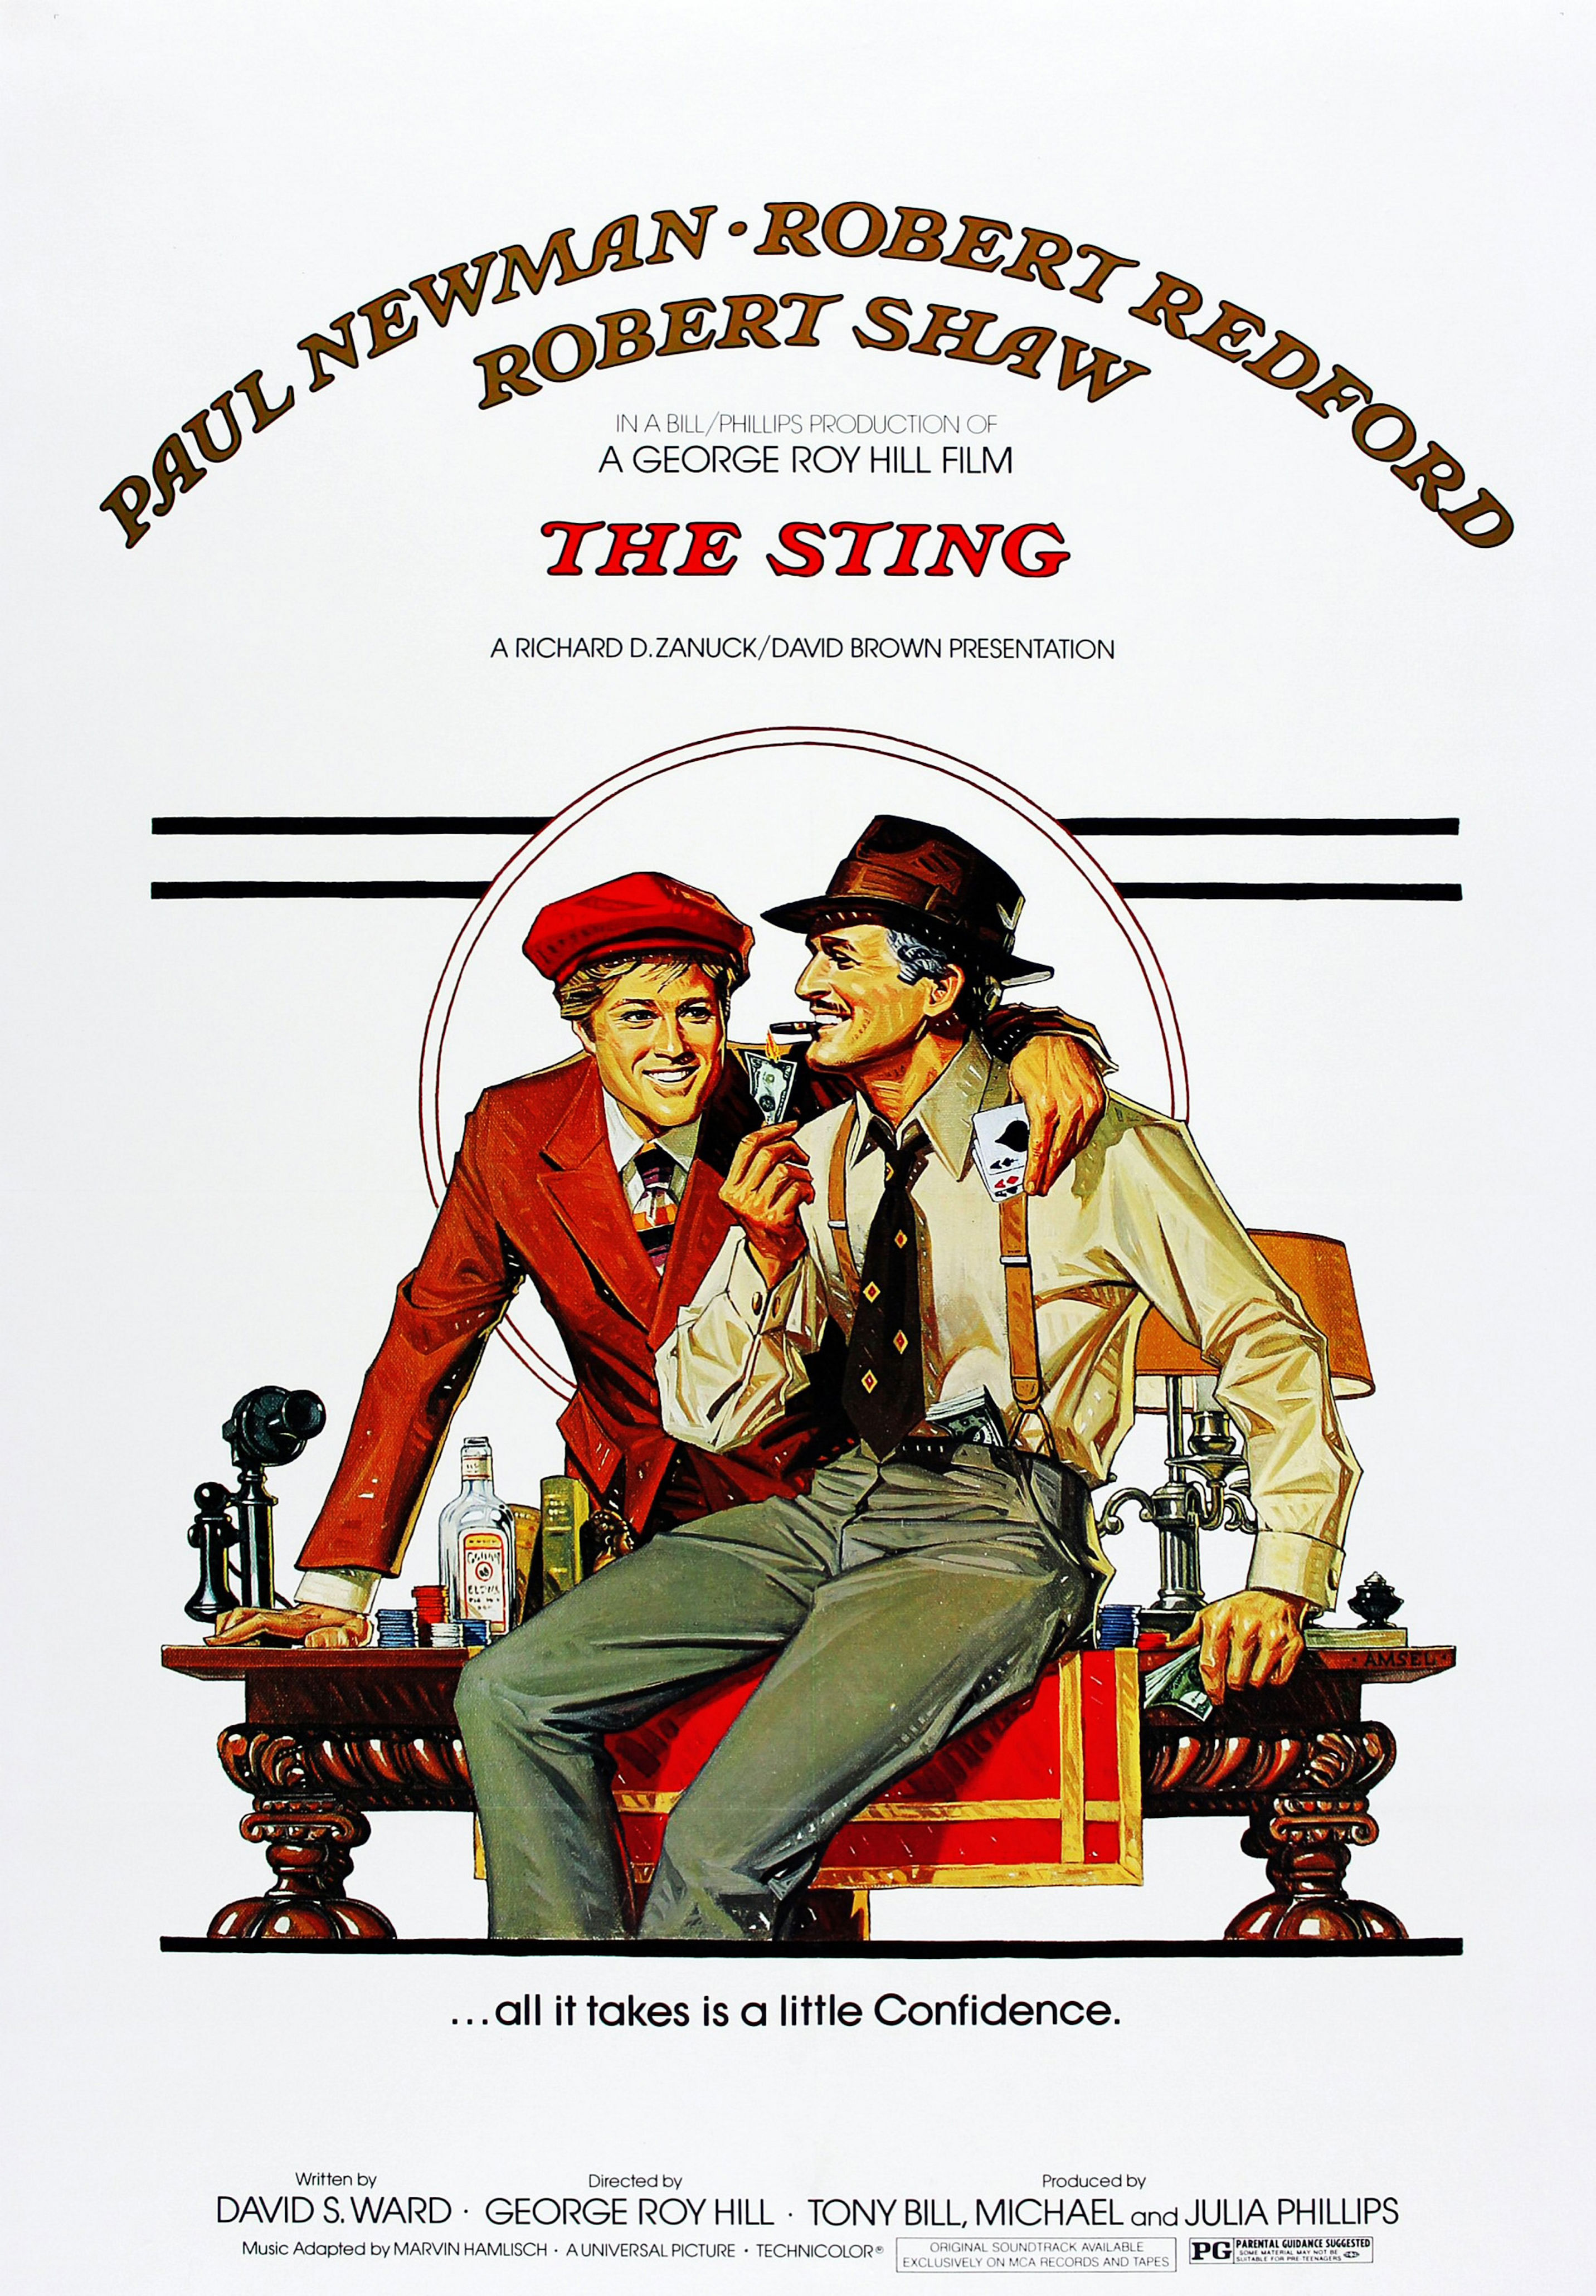 in ‘the sting,’ redford and newman were on equal footing. that’s rare.